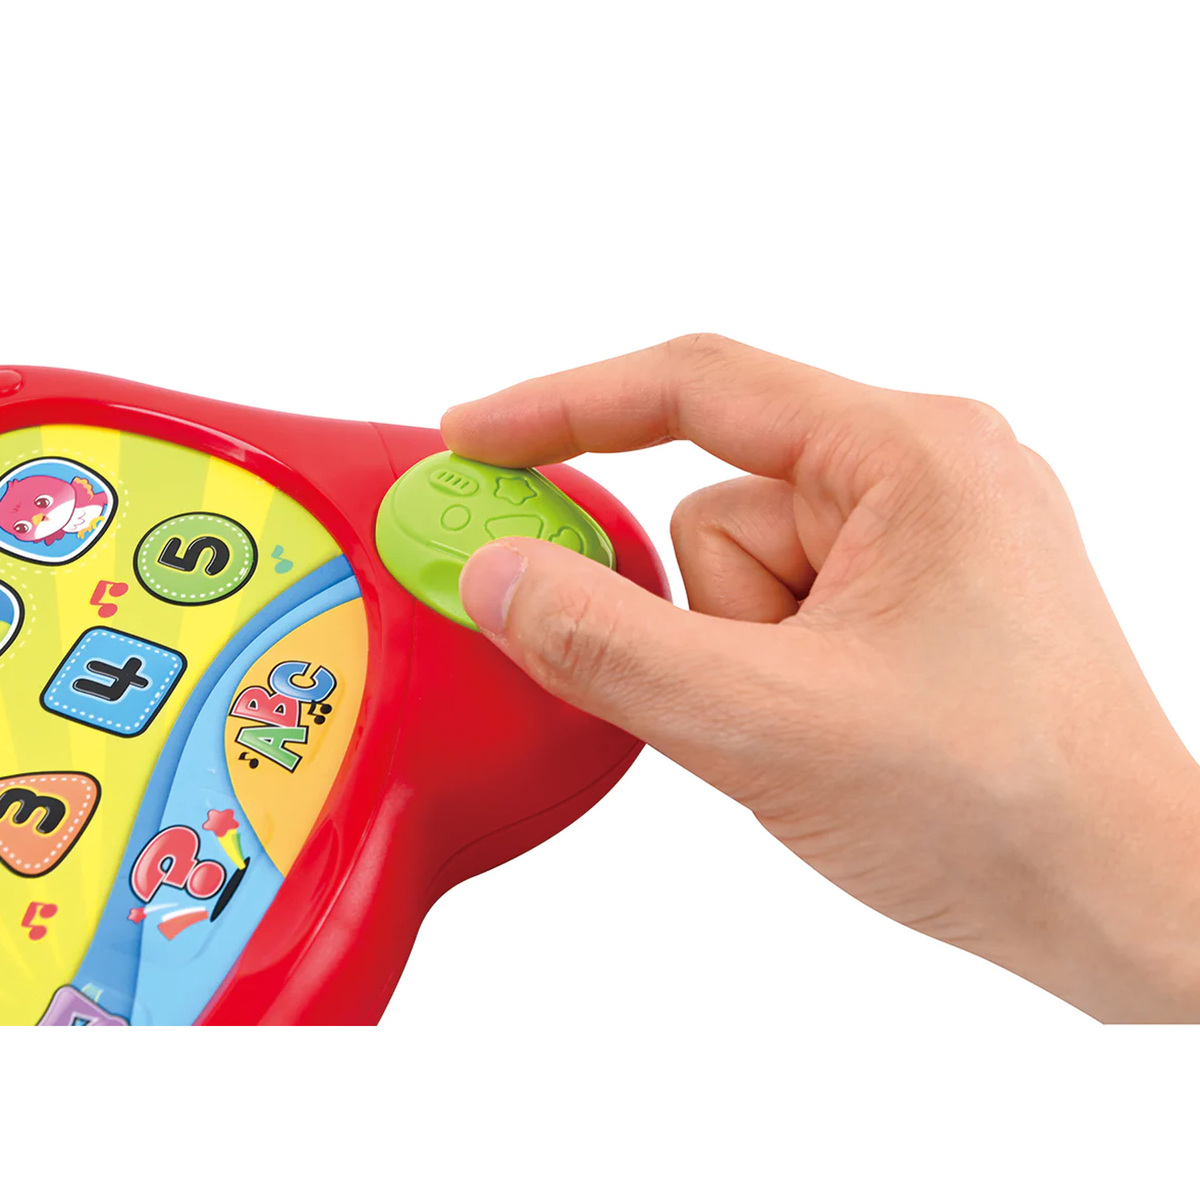 Playgo Press To Learn Laptop, 2597